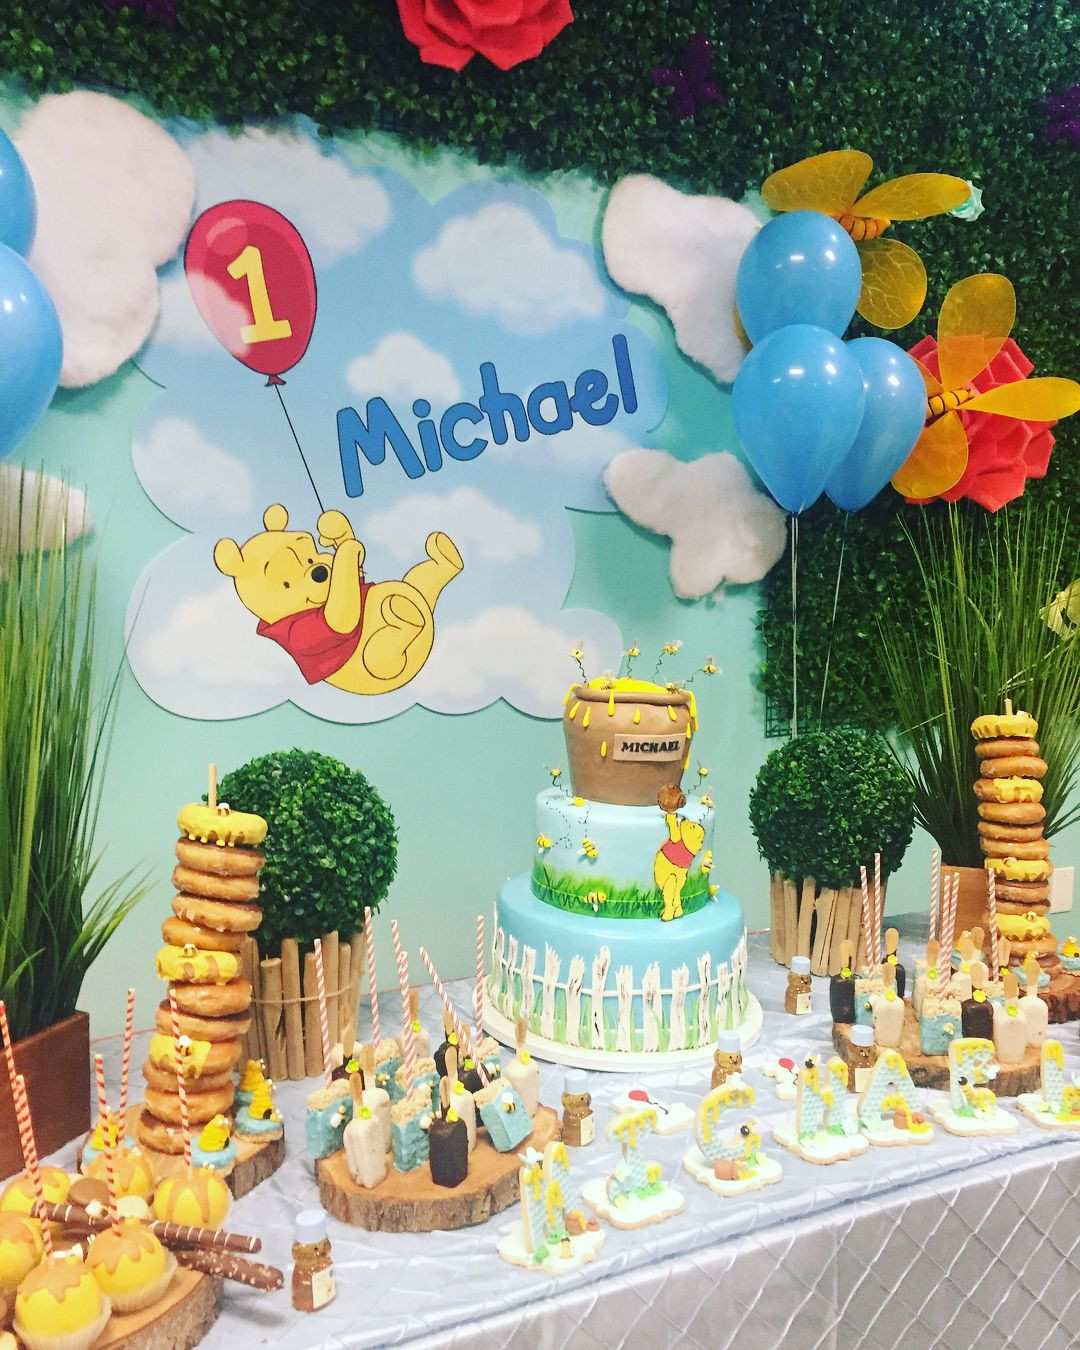 Winnie The Pooh Decorations 1st Birthday
 Winnie the Pooh theme at adamsgardenla with outdoor space